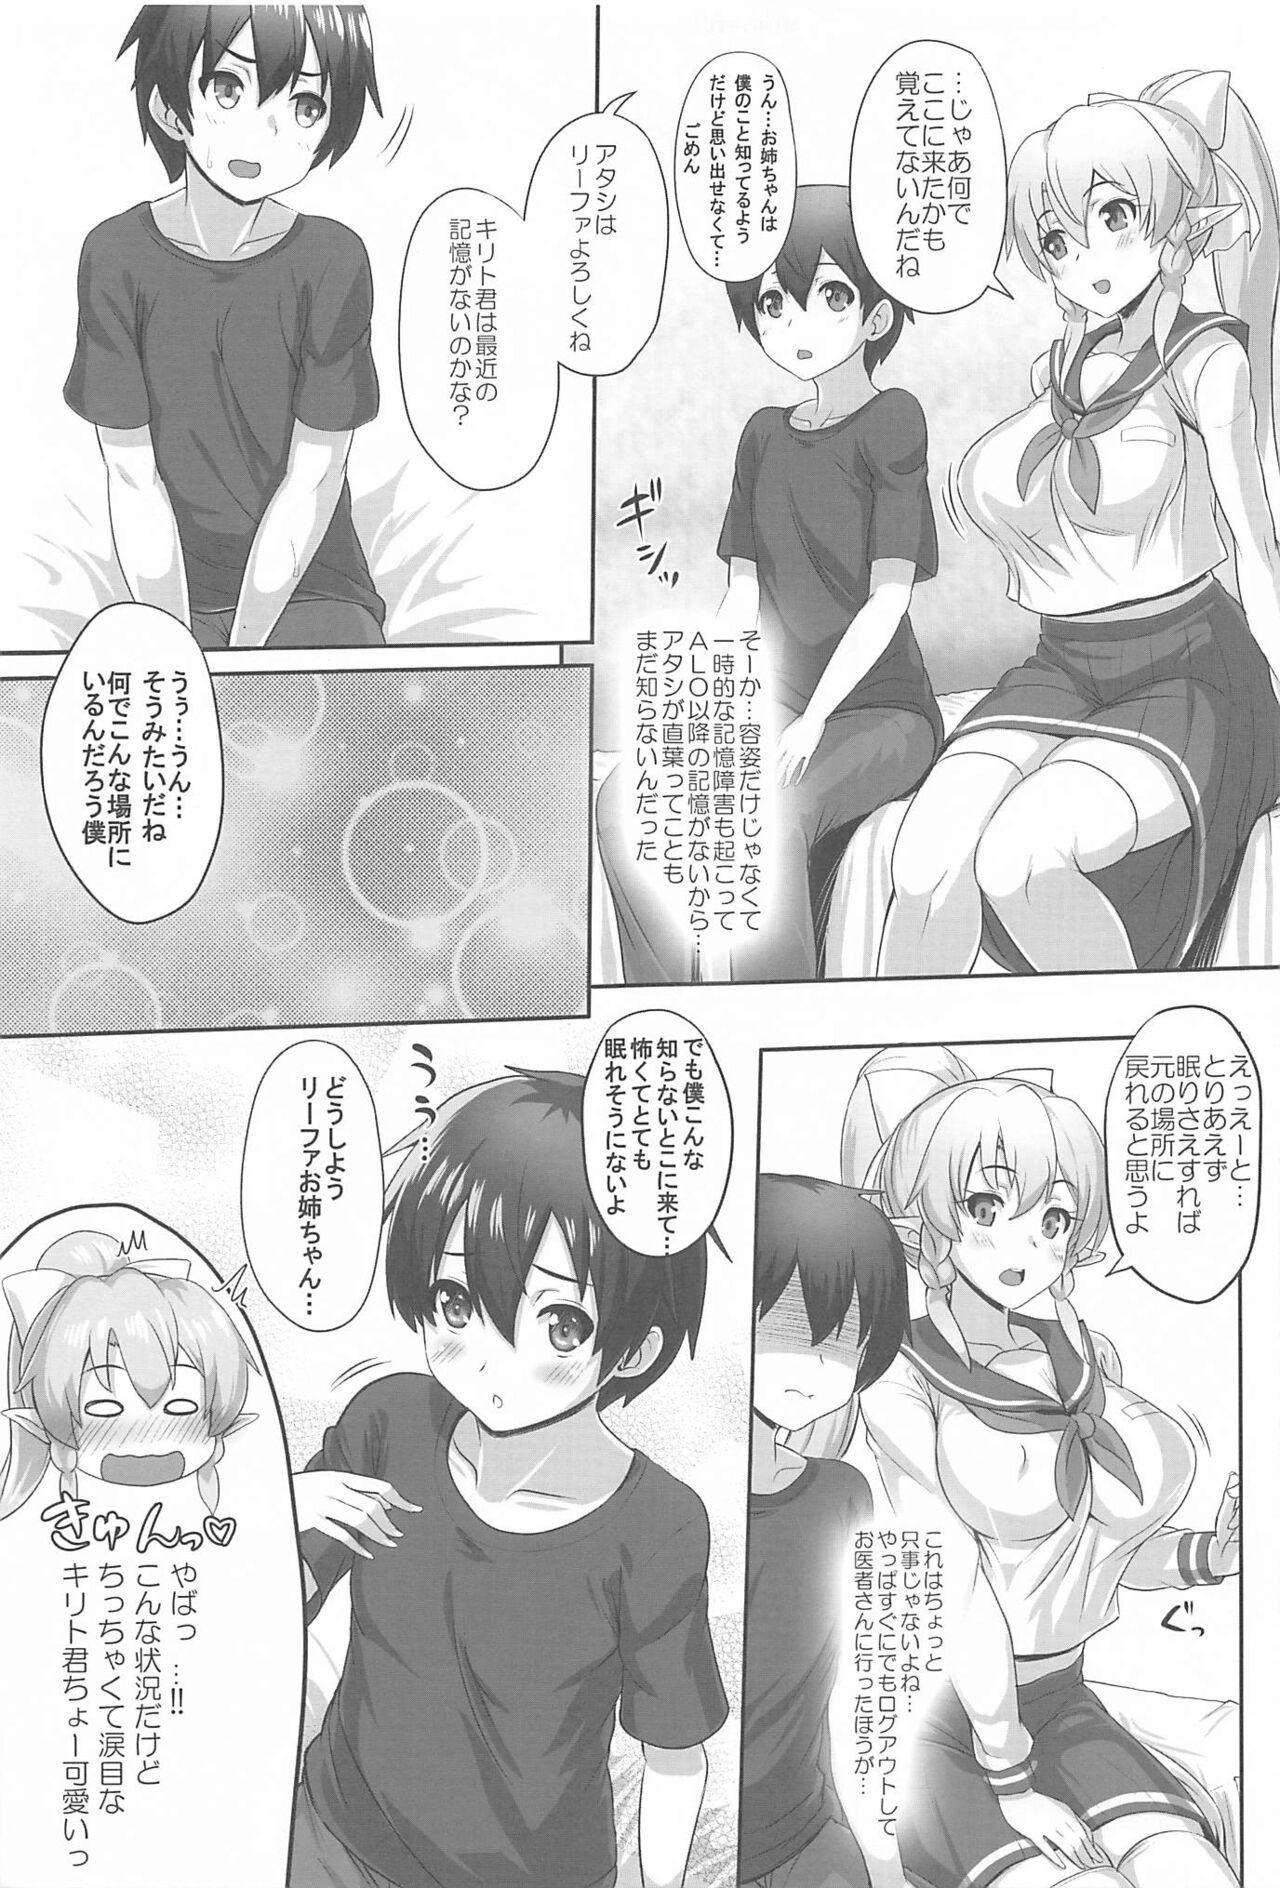 Chubby Sister Affection On&Off 3 SAO Soushuuhen - Sword art online Swallowing - Page 6